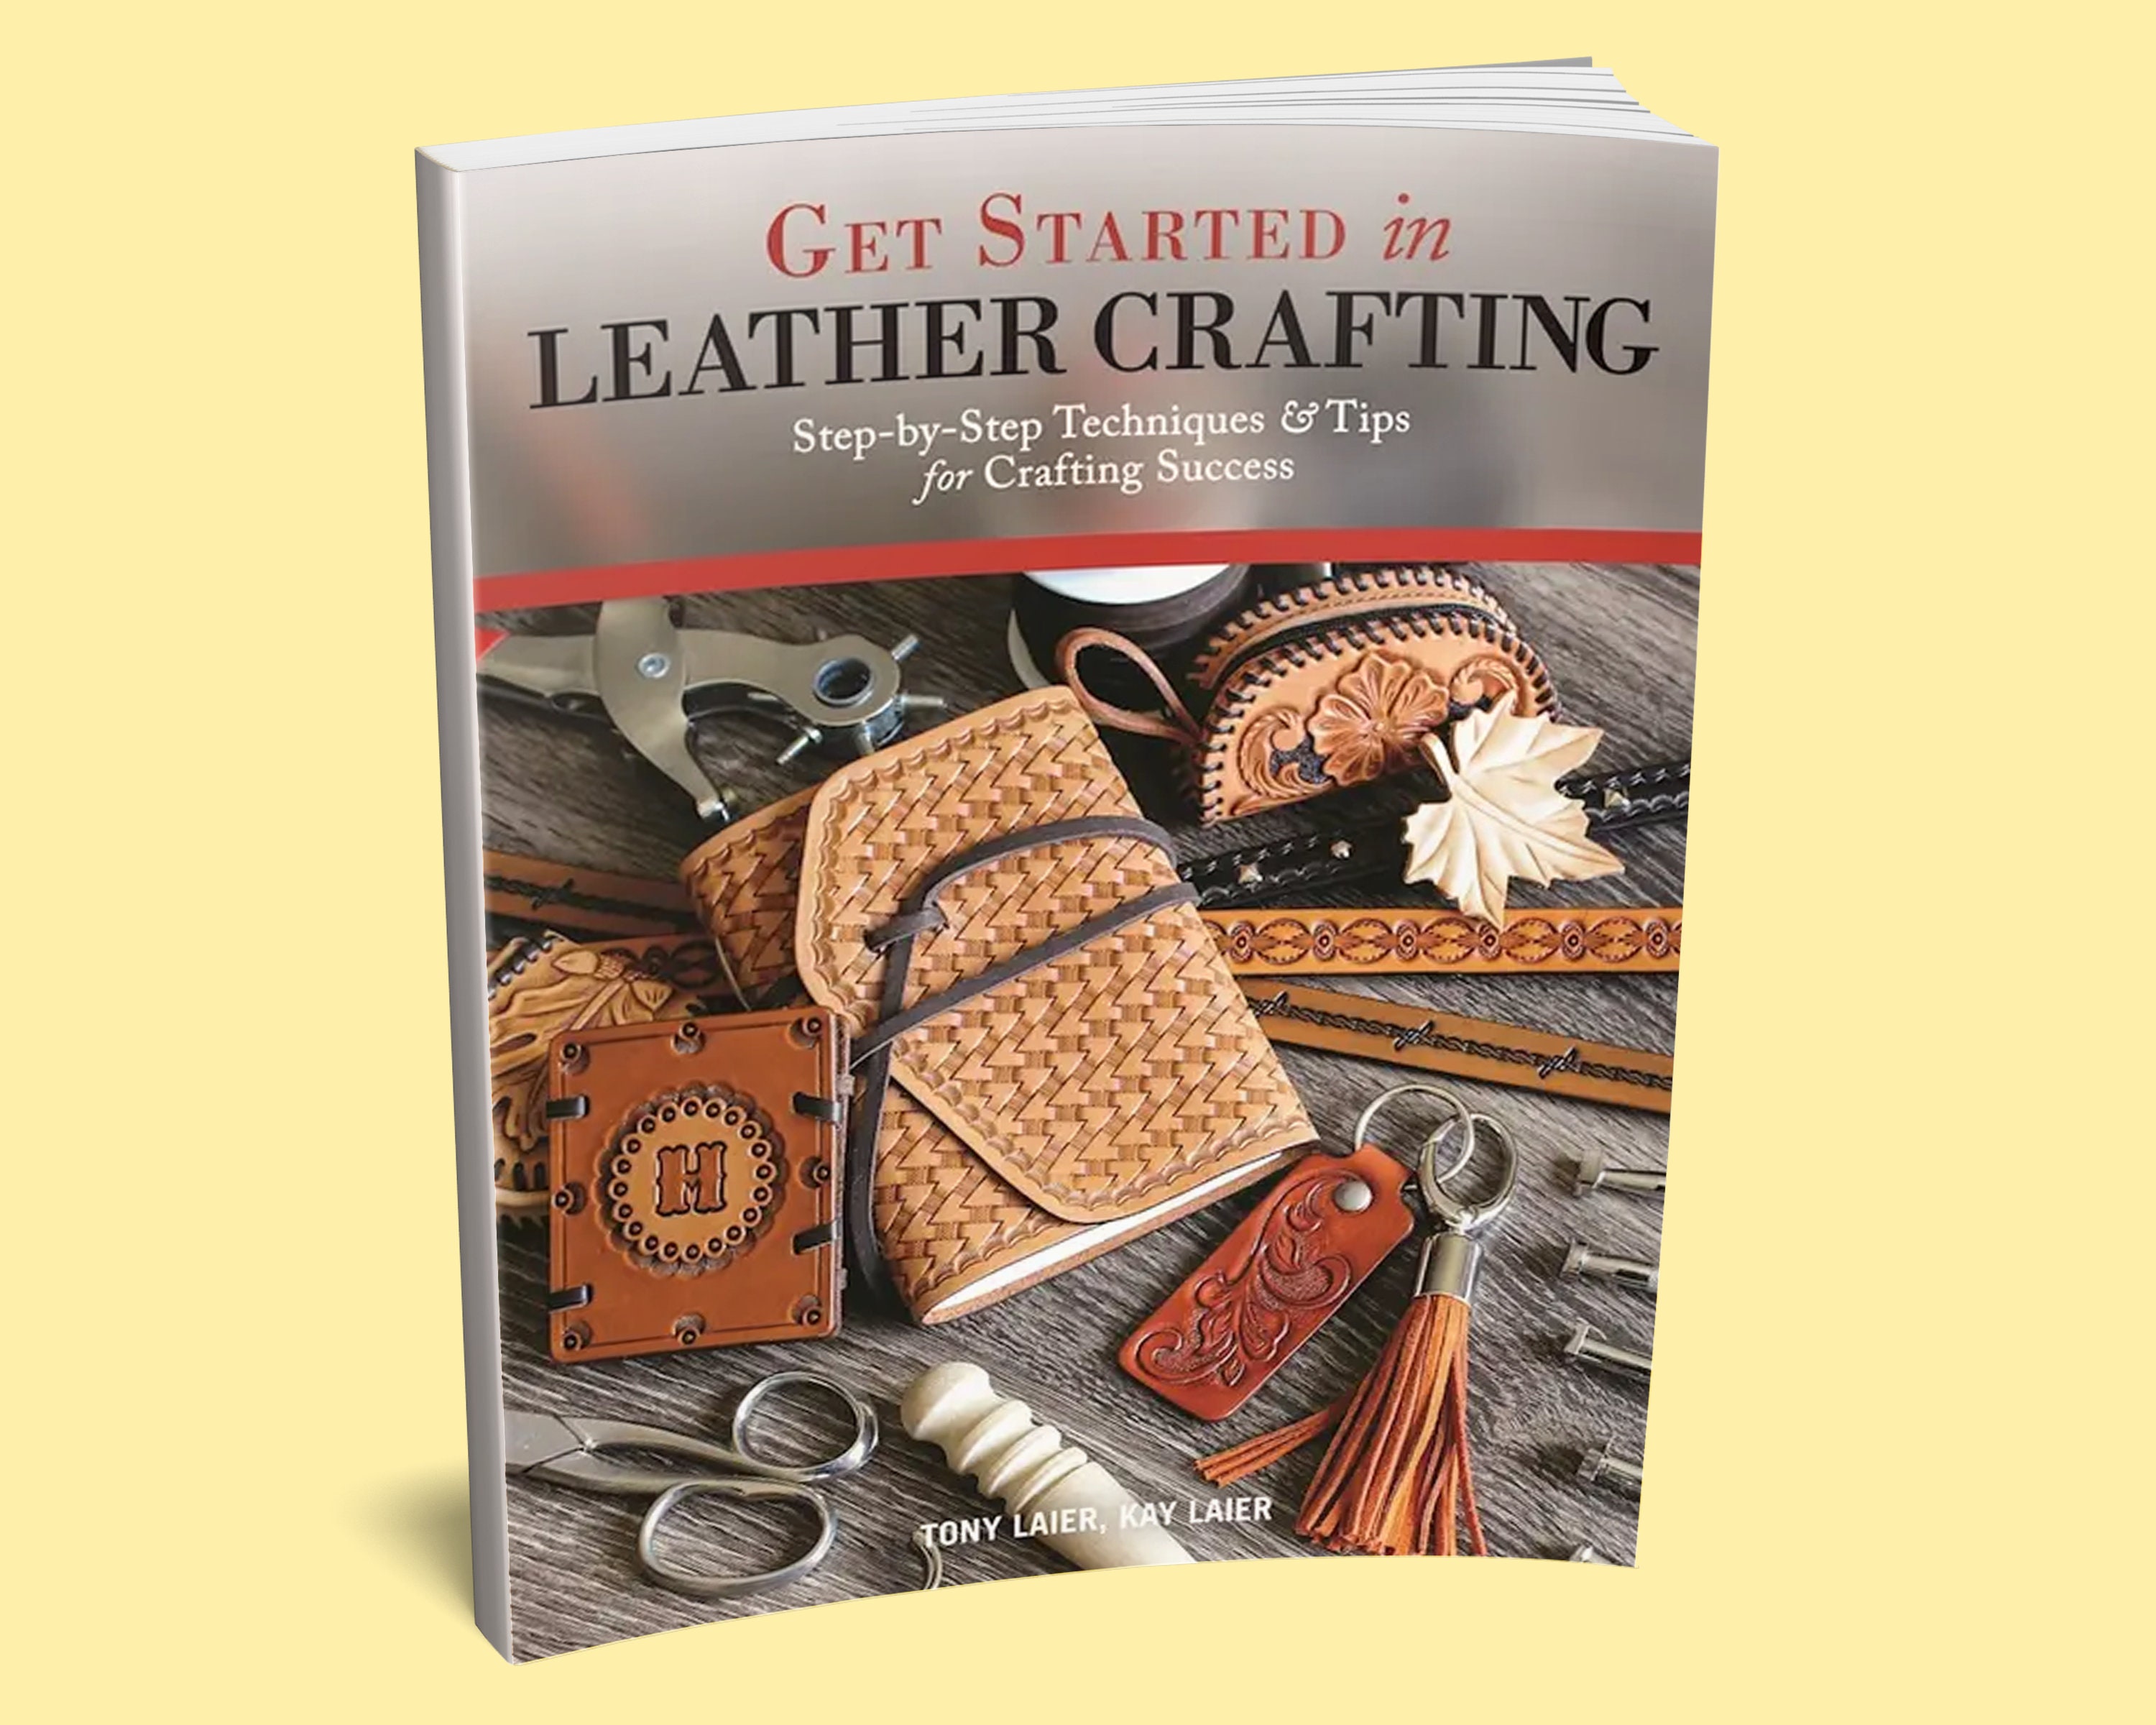 28 Piece Leather Sewing Kit, Leather Work Kit With Big Eye Sewing